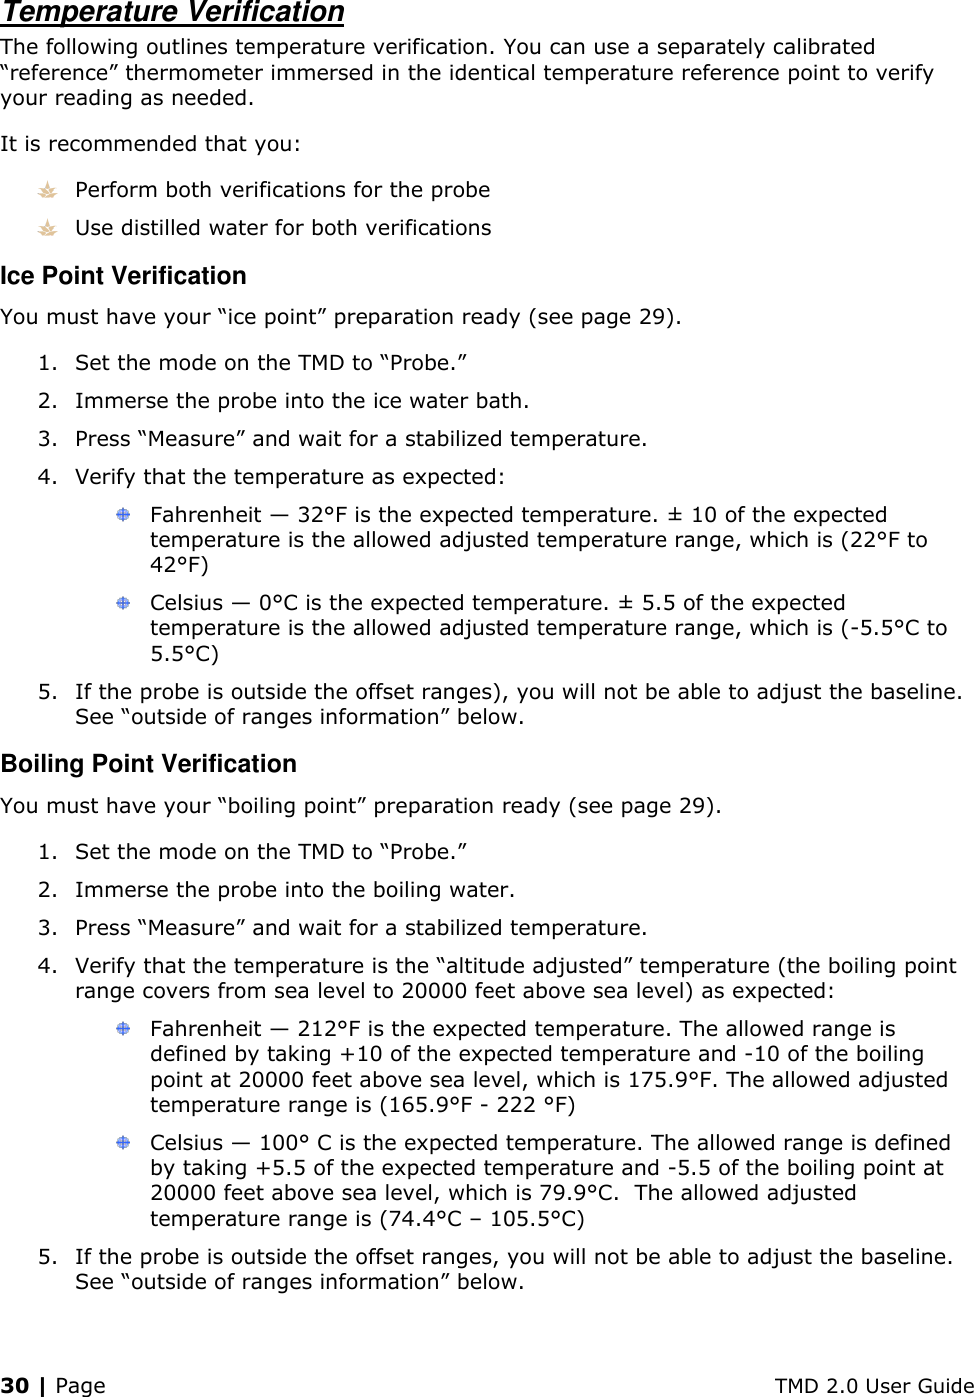 30 | Page    TMD 2.0 User Guide Temperature Verification The following outlines temperature verification. You can use a separately calibrated “reference” thermometer immersed in the identical temperature reference point to verify your reading as needed. It is recommended that you:  Perform both verifications for the probe  Use distilled water for both verifications Ice Point Verification You must have your “ice point” preparation ready (see page 29). 1. Set the mode on the TMD to “Probe.” 2. Immerse the probe into the ice water bath. 3. Press “Measure” and wait for a stabilized temperature. 4. Verify that the temperature as expected:   Fahrenheit — 32°F is the expected temperature. ± 10 of the expected temperature is the allowed adjusted temperature range, which is (22°F to 42°F)  Celsius — 0°C is the expected temperature. ± 5.5 of the expected temperature is the allowed adjusted temperature range, which is (-5.5°C to 5.5°C) 5. If the probe is outside the offset ranges), you will not be able to adjust the baseline. See “outside of ranges information” below. Boiling Point Verification You must have your “boiling point” preparation ready (see page 29). 1. Set the mode on the TMD to “Probe.” 2. Immerse the probe into the boiling water. 3. Press “Measure” and wait for a stabilized temperature. 4. Verify that the temperature is the “altitude adjusted” temperature (the boiling point range covers from sea level to 20000 feet above sea level) as expected:  Fahrenheit — 212°F is the expected temperature. The allowed range is defined by taking +10 of the expected temperature and -10 of the boiling point at 20000 feet above sea level, which is 175.9°F. The allowed adjusted temperature range is (165.9°F - 222 °F)  Celsius — 100° C is the expected temperature. The allowed range is defined by taking +5.5 of the expected temperature and -5.5 of the boiling point at 20000 feet above sea level, which is 79.9°C.  The allowed adjusted temperature range is (74.4°C – 105.5°C) 5. If the probe is outside the offset ranges, you will not be able to adjust the baseline. See “outside of ranges information” below.   